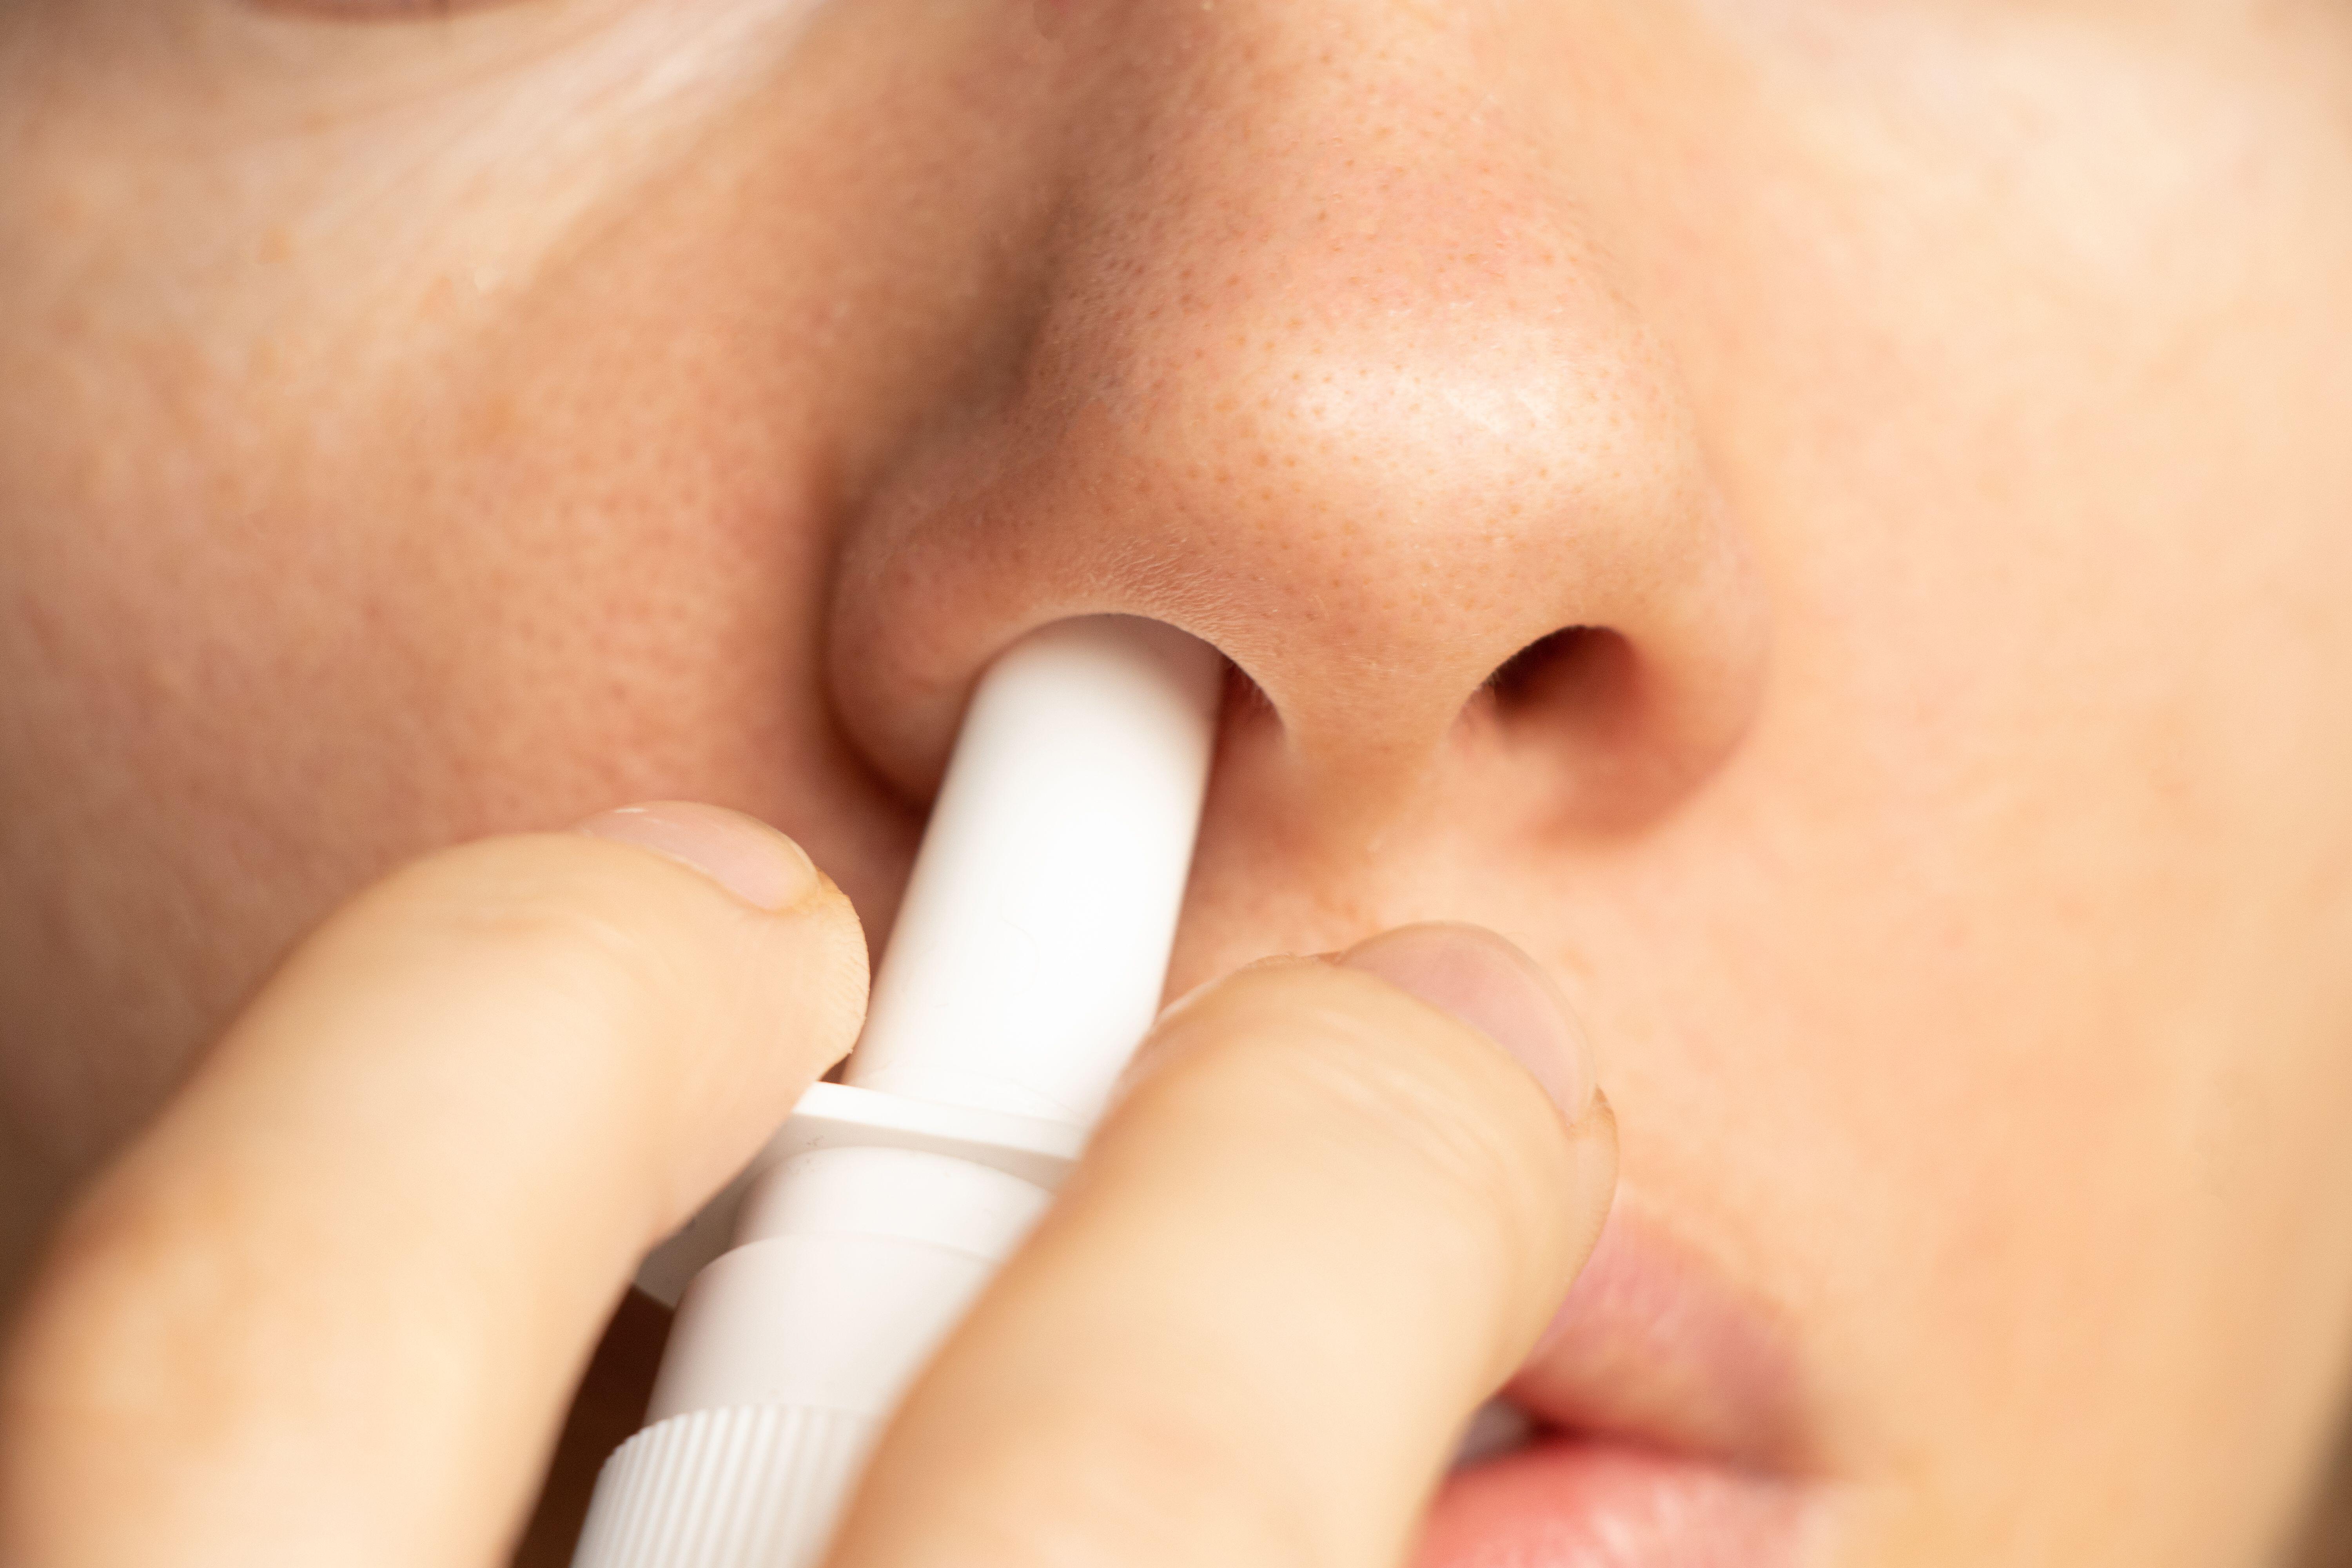 Stuffy Noses Are Miserable. These Nasal Congestion Treatments Actually Work